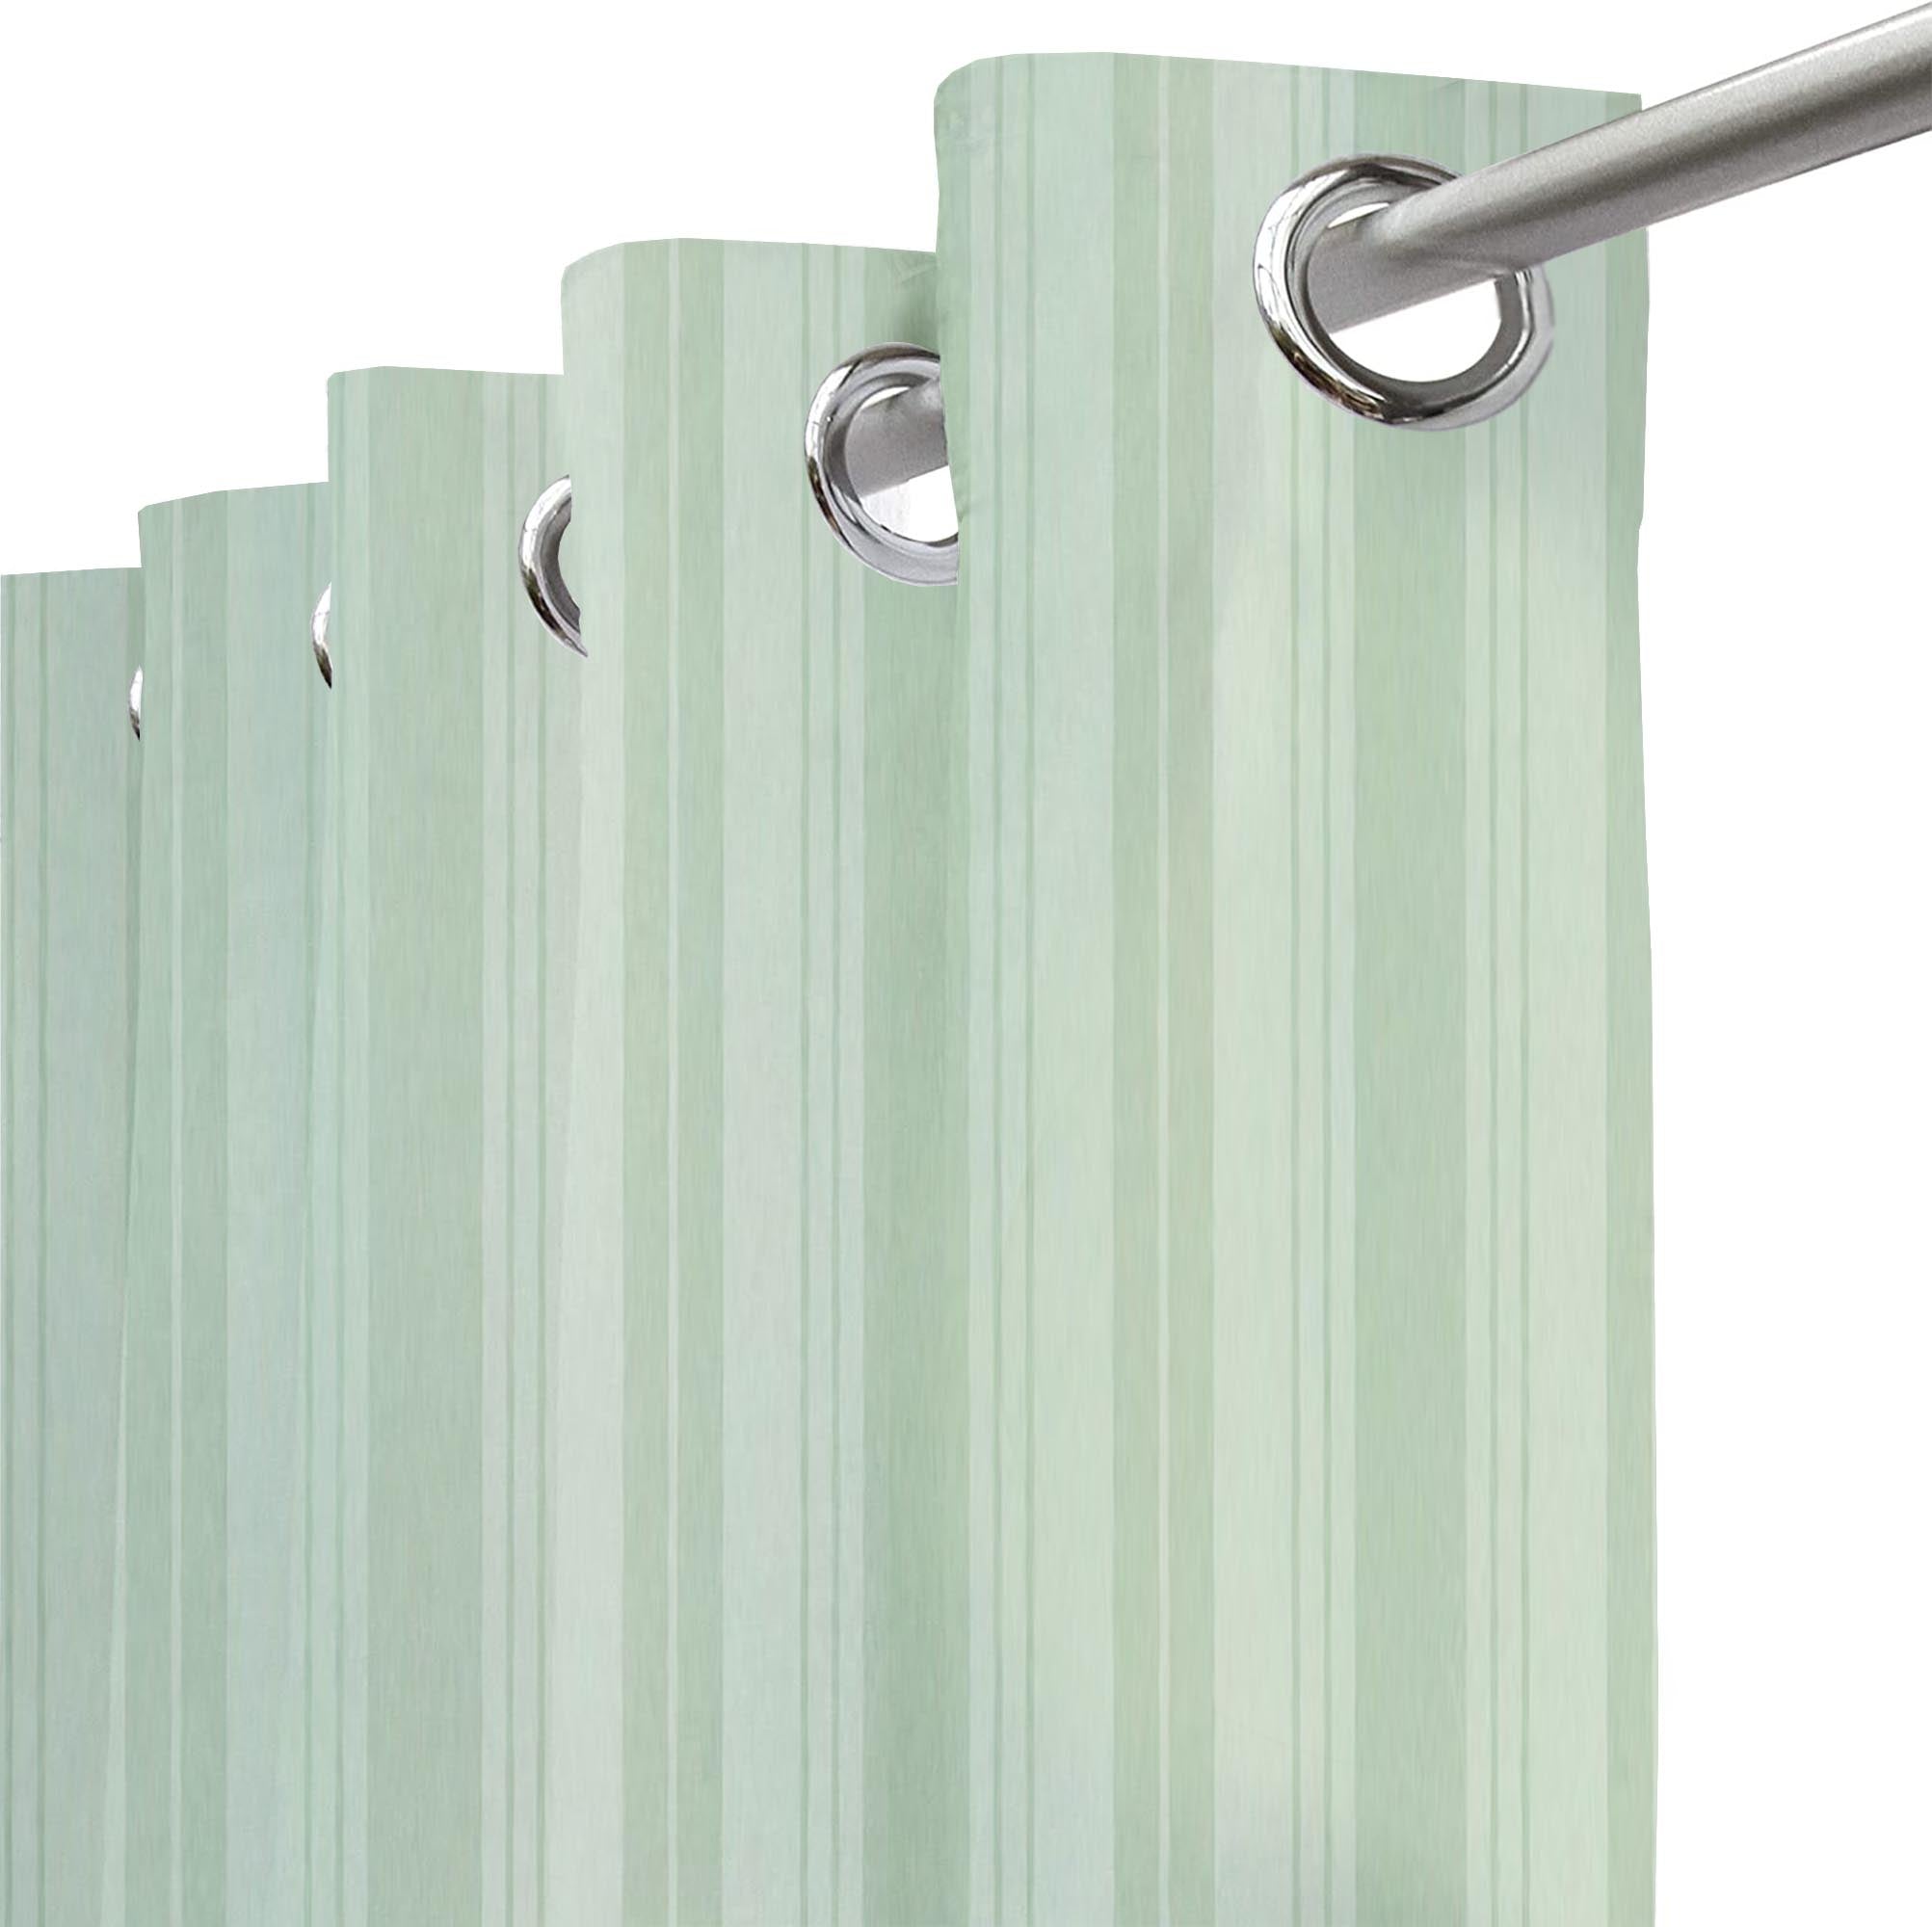 Lushomes shower curtain, Striped Light Green bathroom curtains, Polyester waterproof 6x6.5 ft with Metal 10 Eyelets, non-PVC, Non-Plastic, For Washroom, Balcony for Rain( 6 ft W x 6.5 Ft H, Pk of 1)